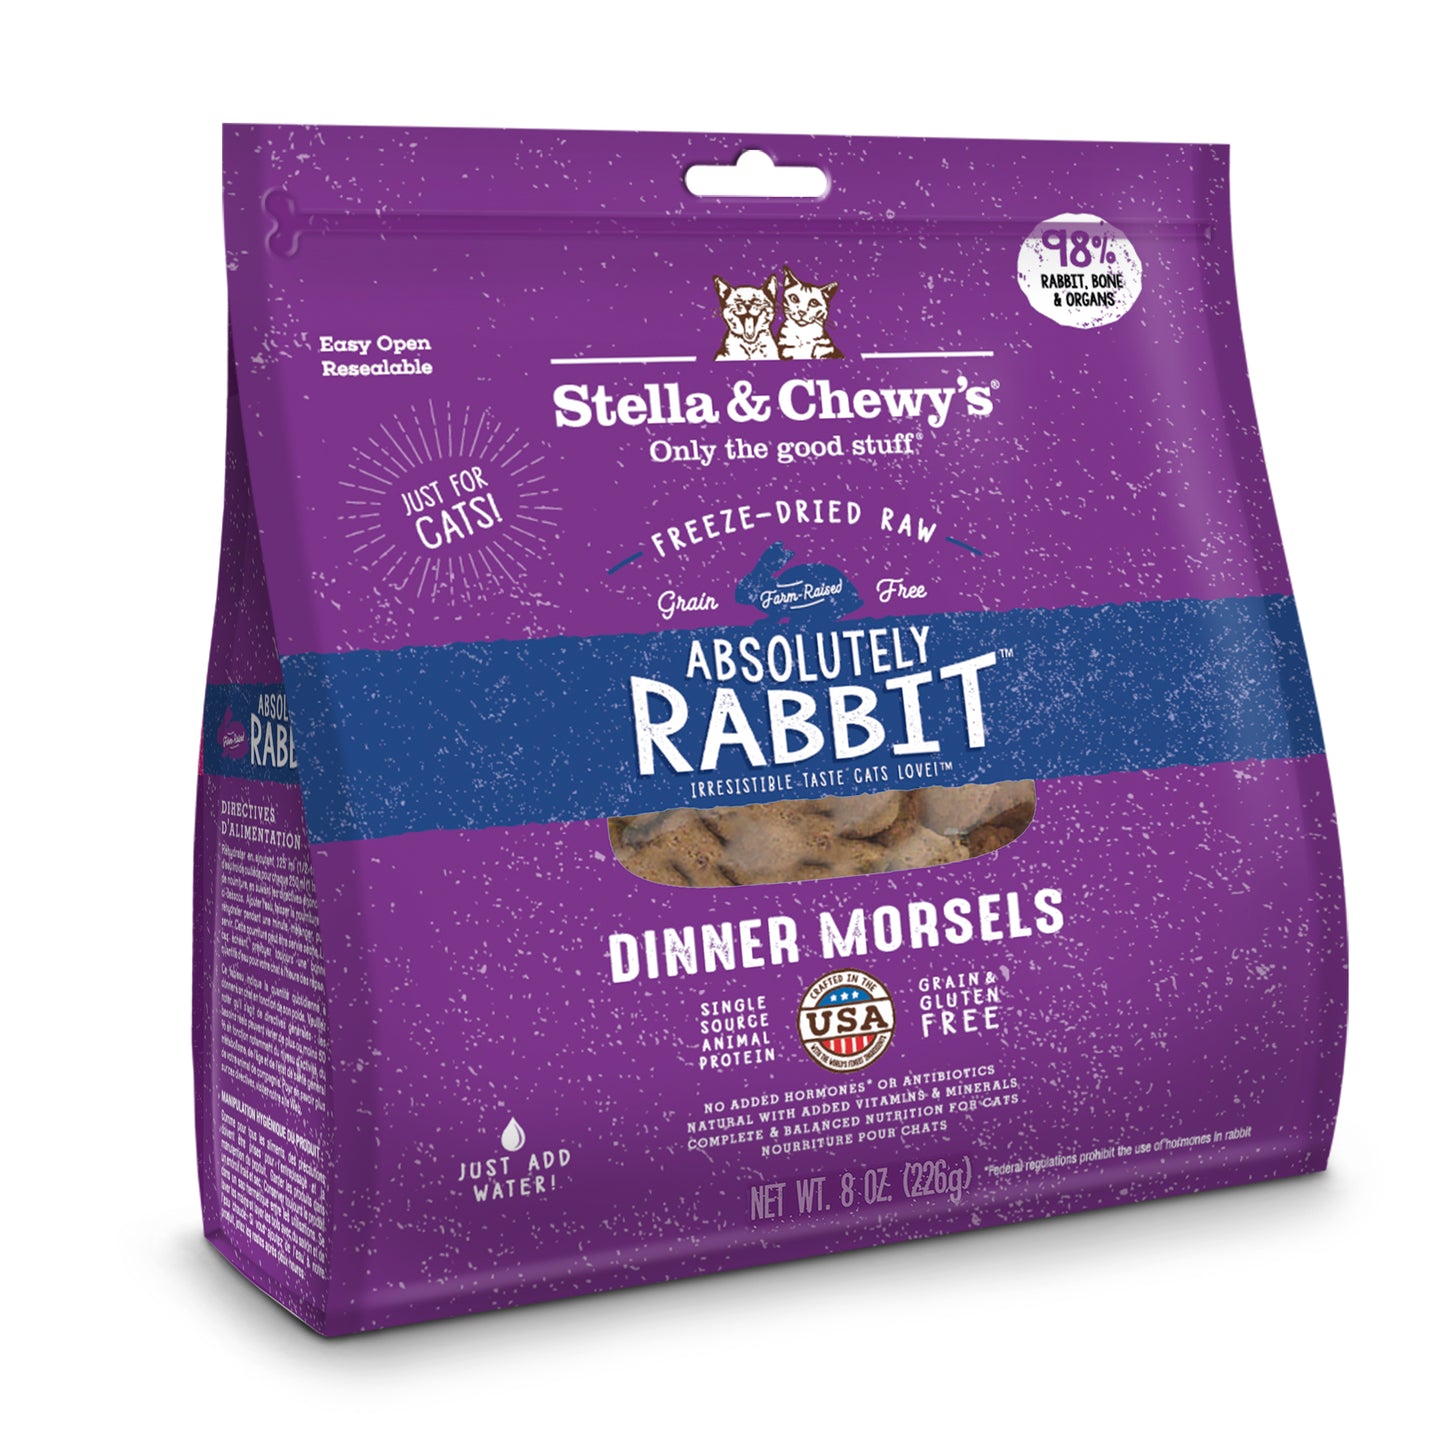 Stella and Chewy's Absolutely Rabbit Dinner Morsels Freeze Dried Cat Food 8oz